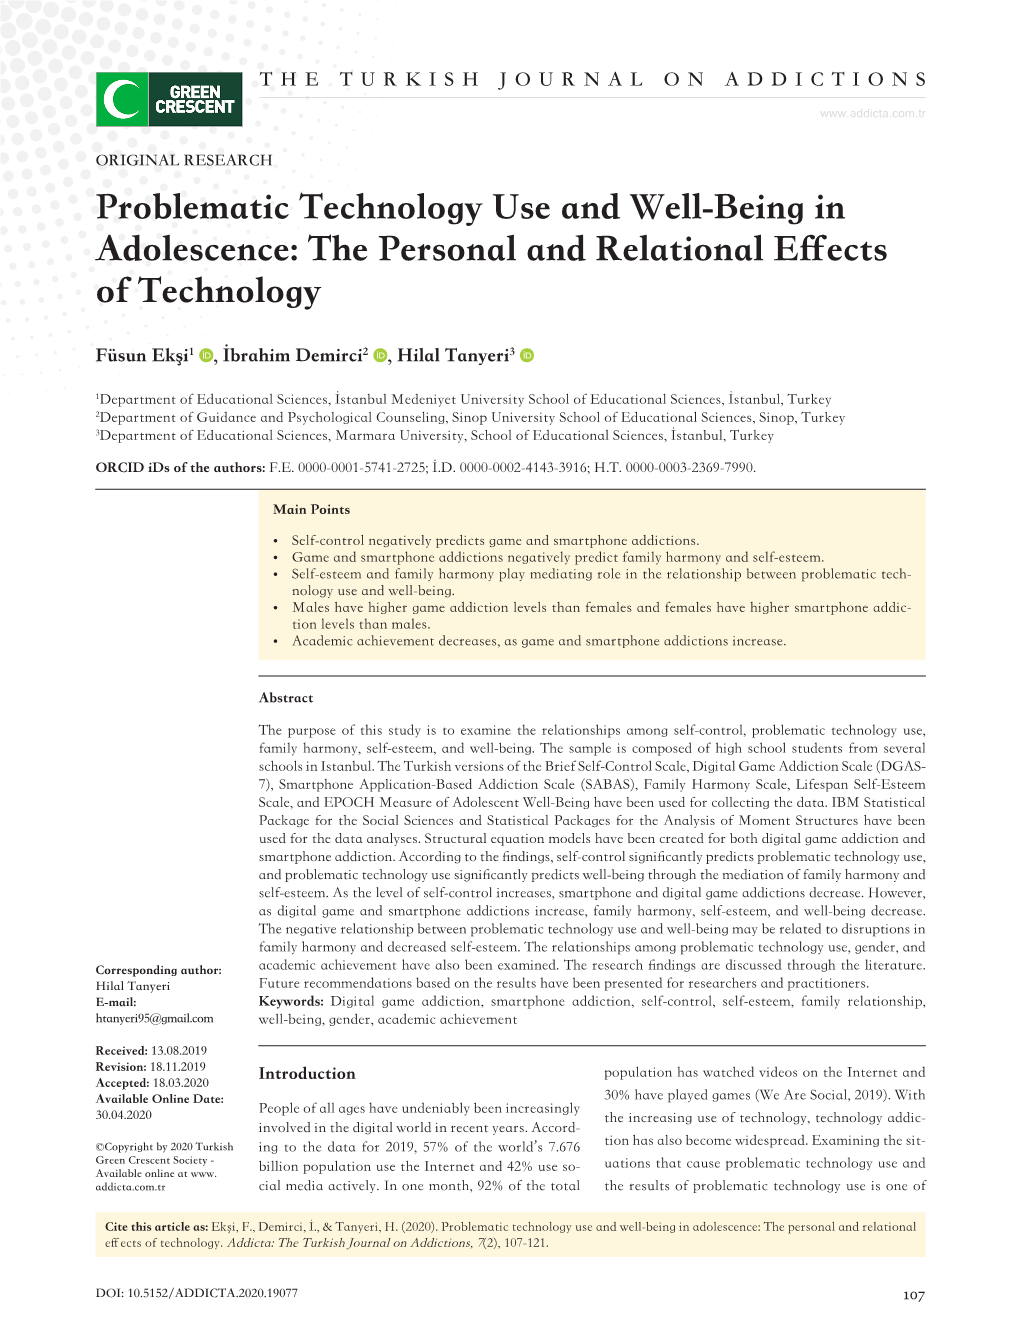 Problematic Technology Use and Well-Being in Adolescence: the Personal and Relational Effects of Technology